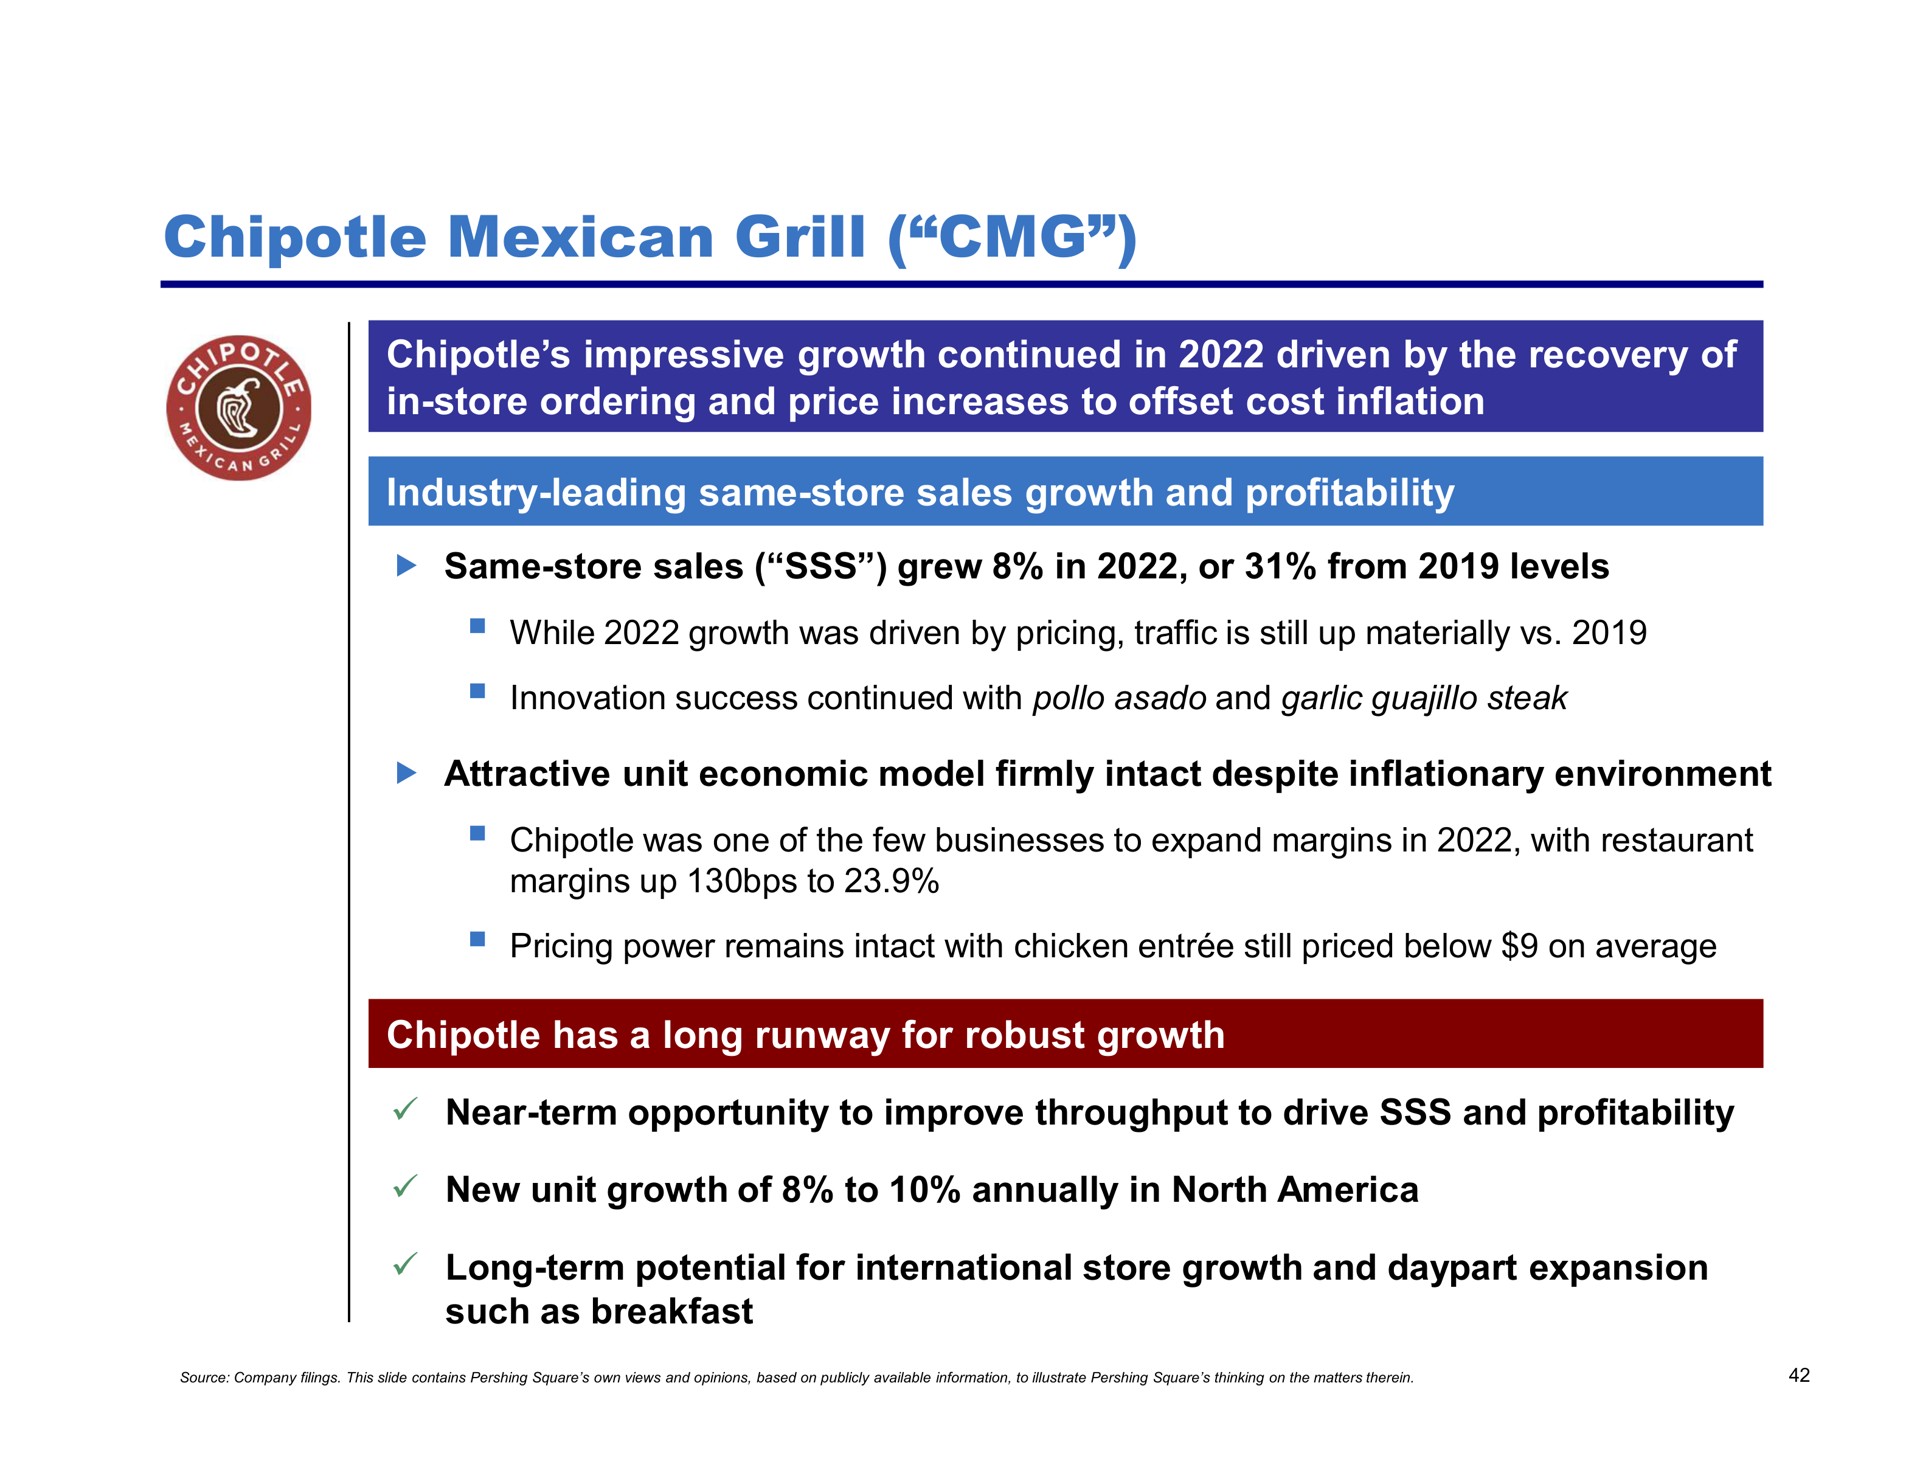 grill impressive growth continued in driven by the recovery of in store ordering and price increases to offset cost inflation industry leading same store sales growth and profitability has a long runway for robust growth | Pershing Square